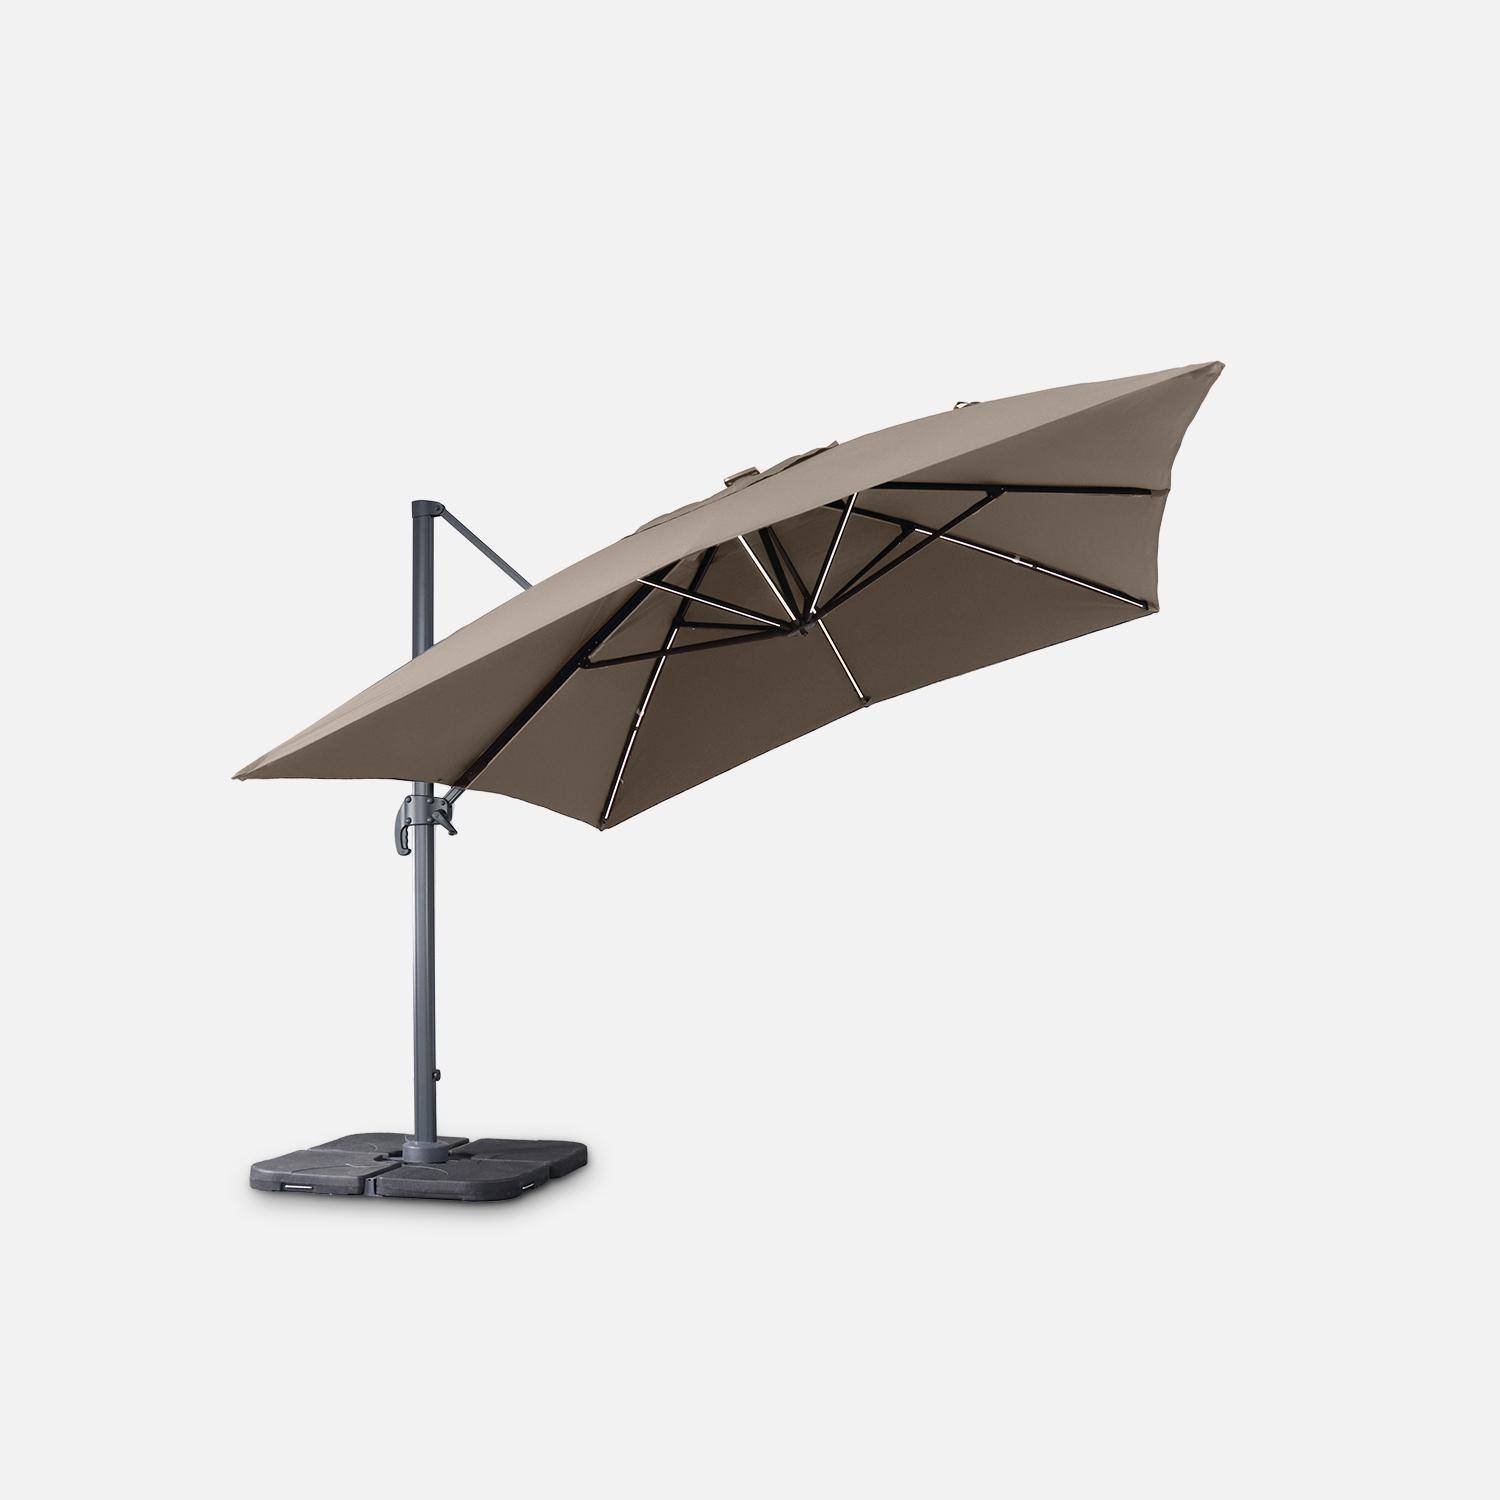 Premium rectangular 3x4m cantilever parasol with solar-powered integrated LED lights - Cantilever parasol, tiltable, foldable with 360° rotation, solar charging, cover included - Luce - Beige-brown Photo3